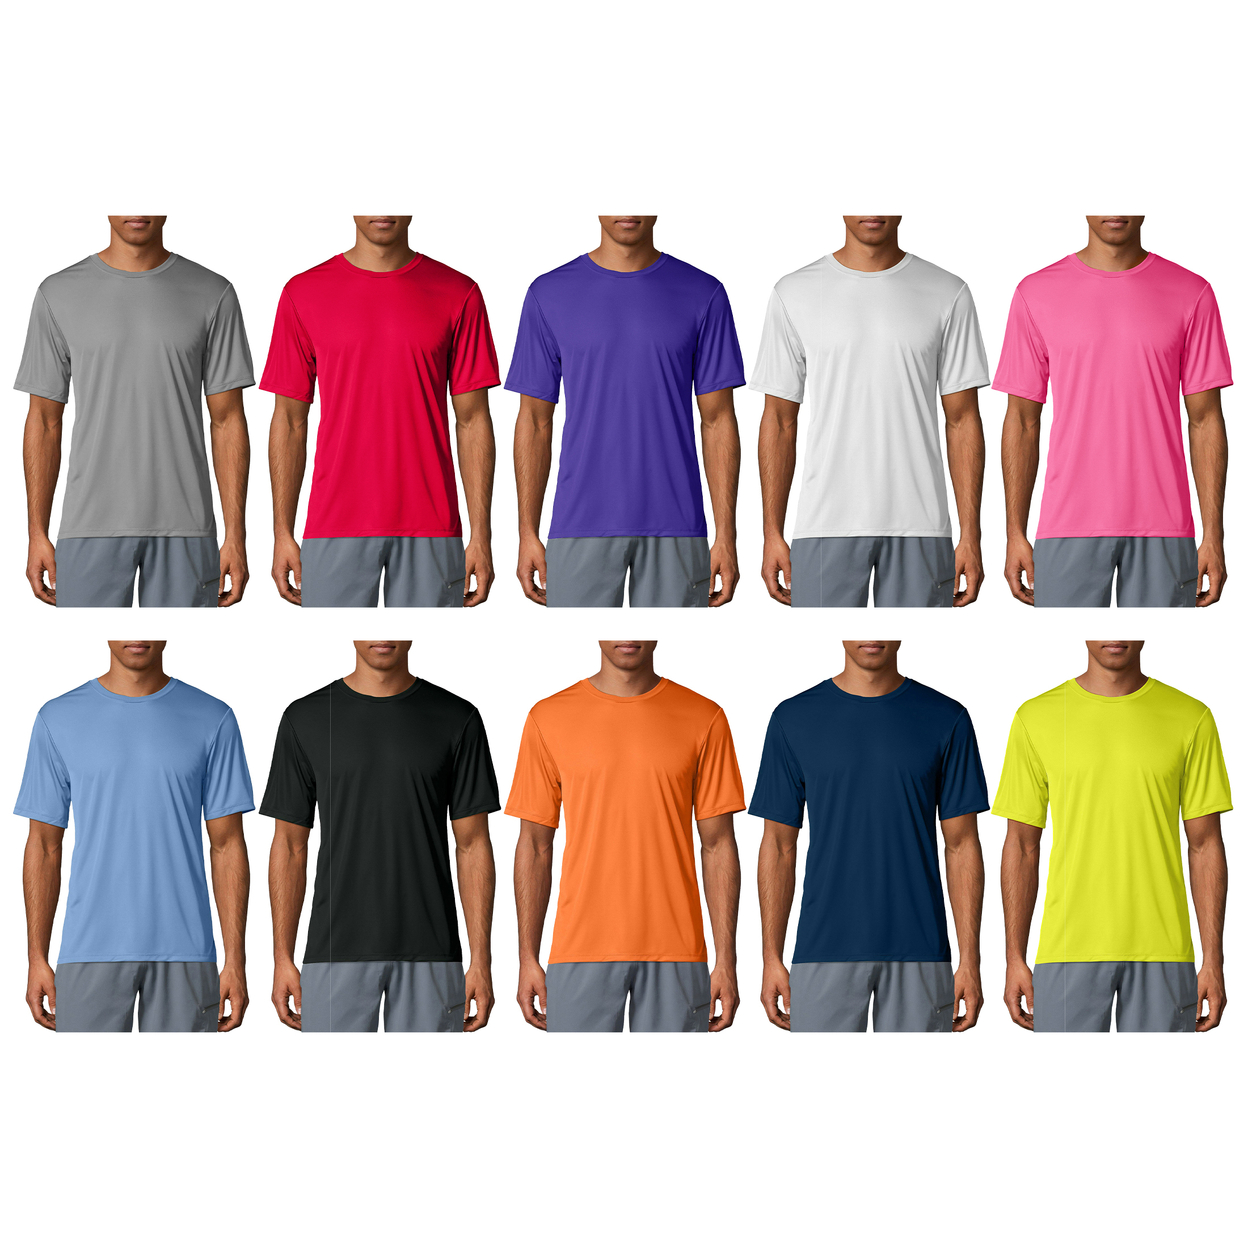 4-Pack: Men's Moisture Wicking Cool Dri-Fit Performance Short Sleeve Crew Neck T-Shirts - Small